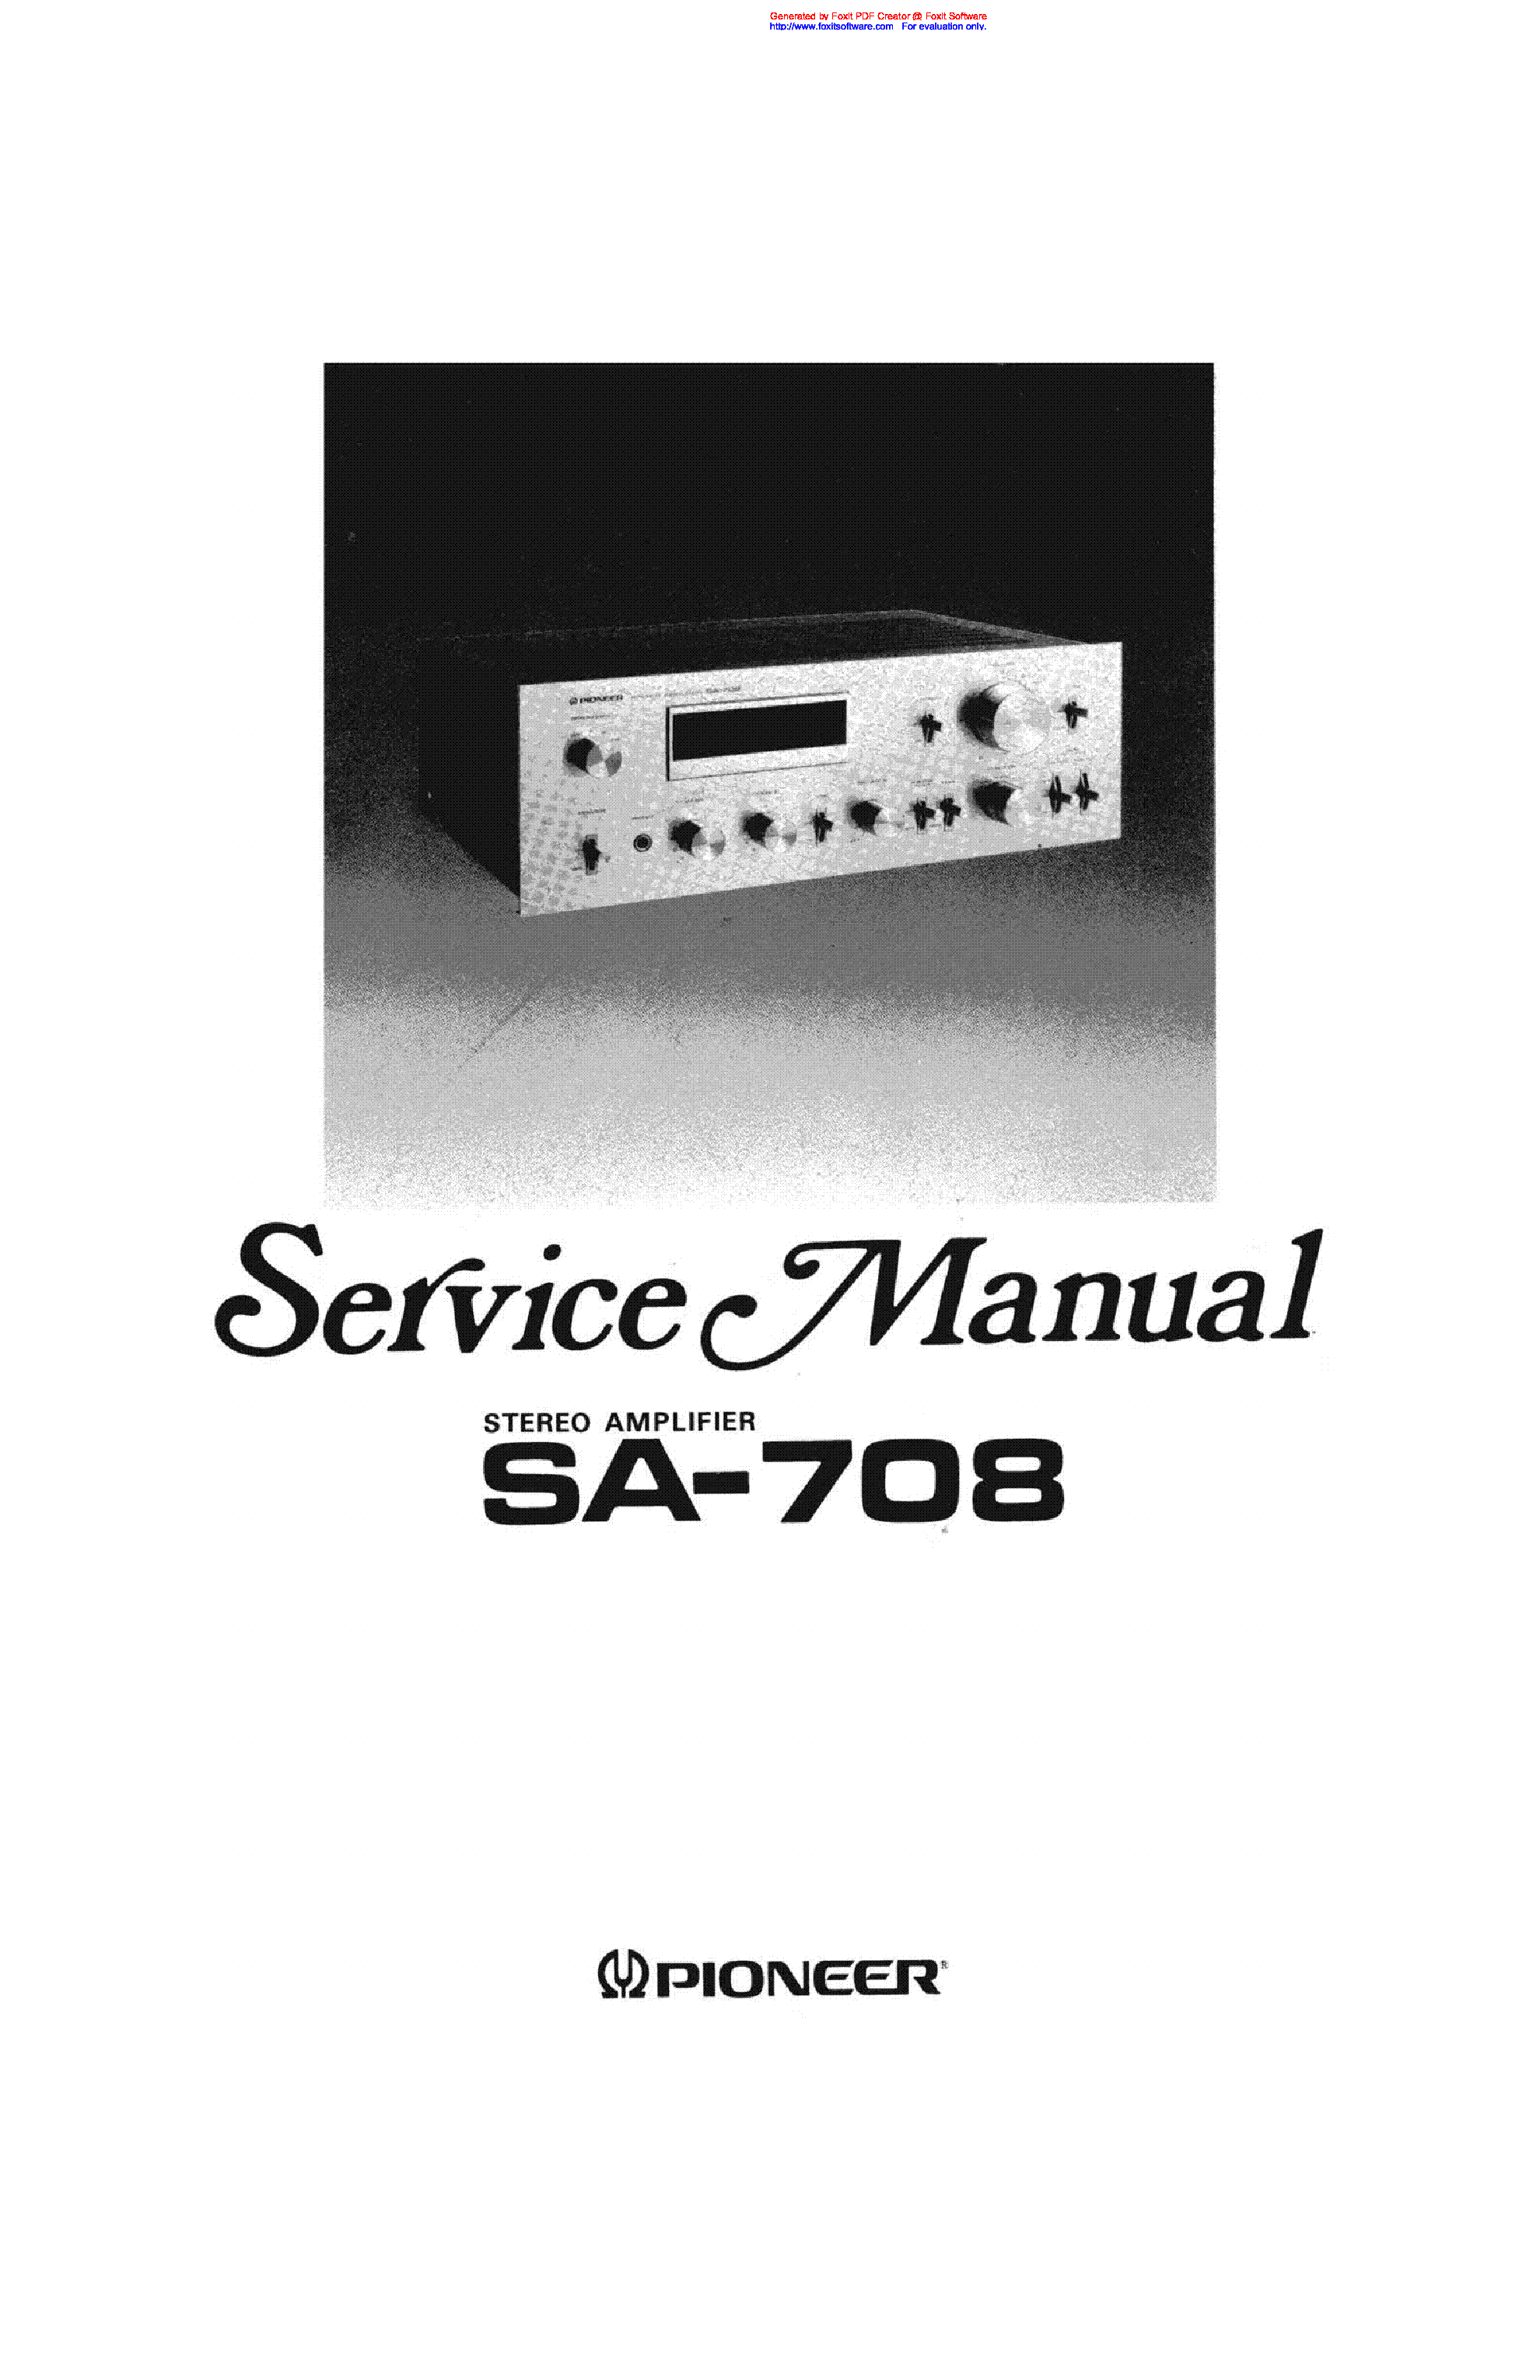 PIONEER SA-708 SCH 2 service manual (1st page)